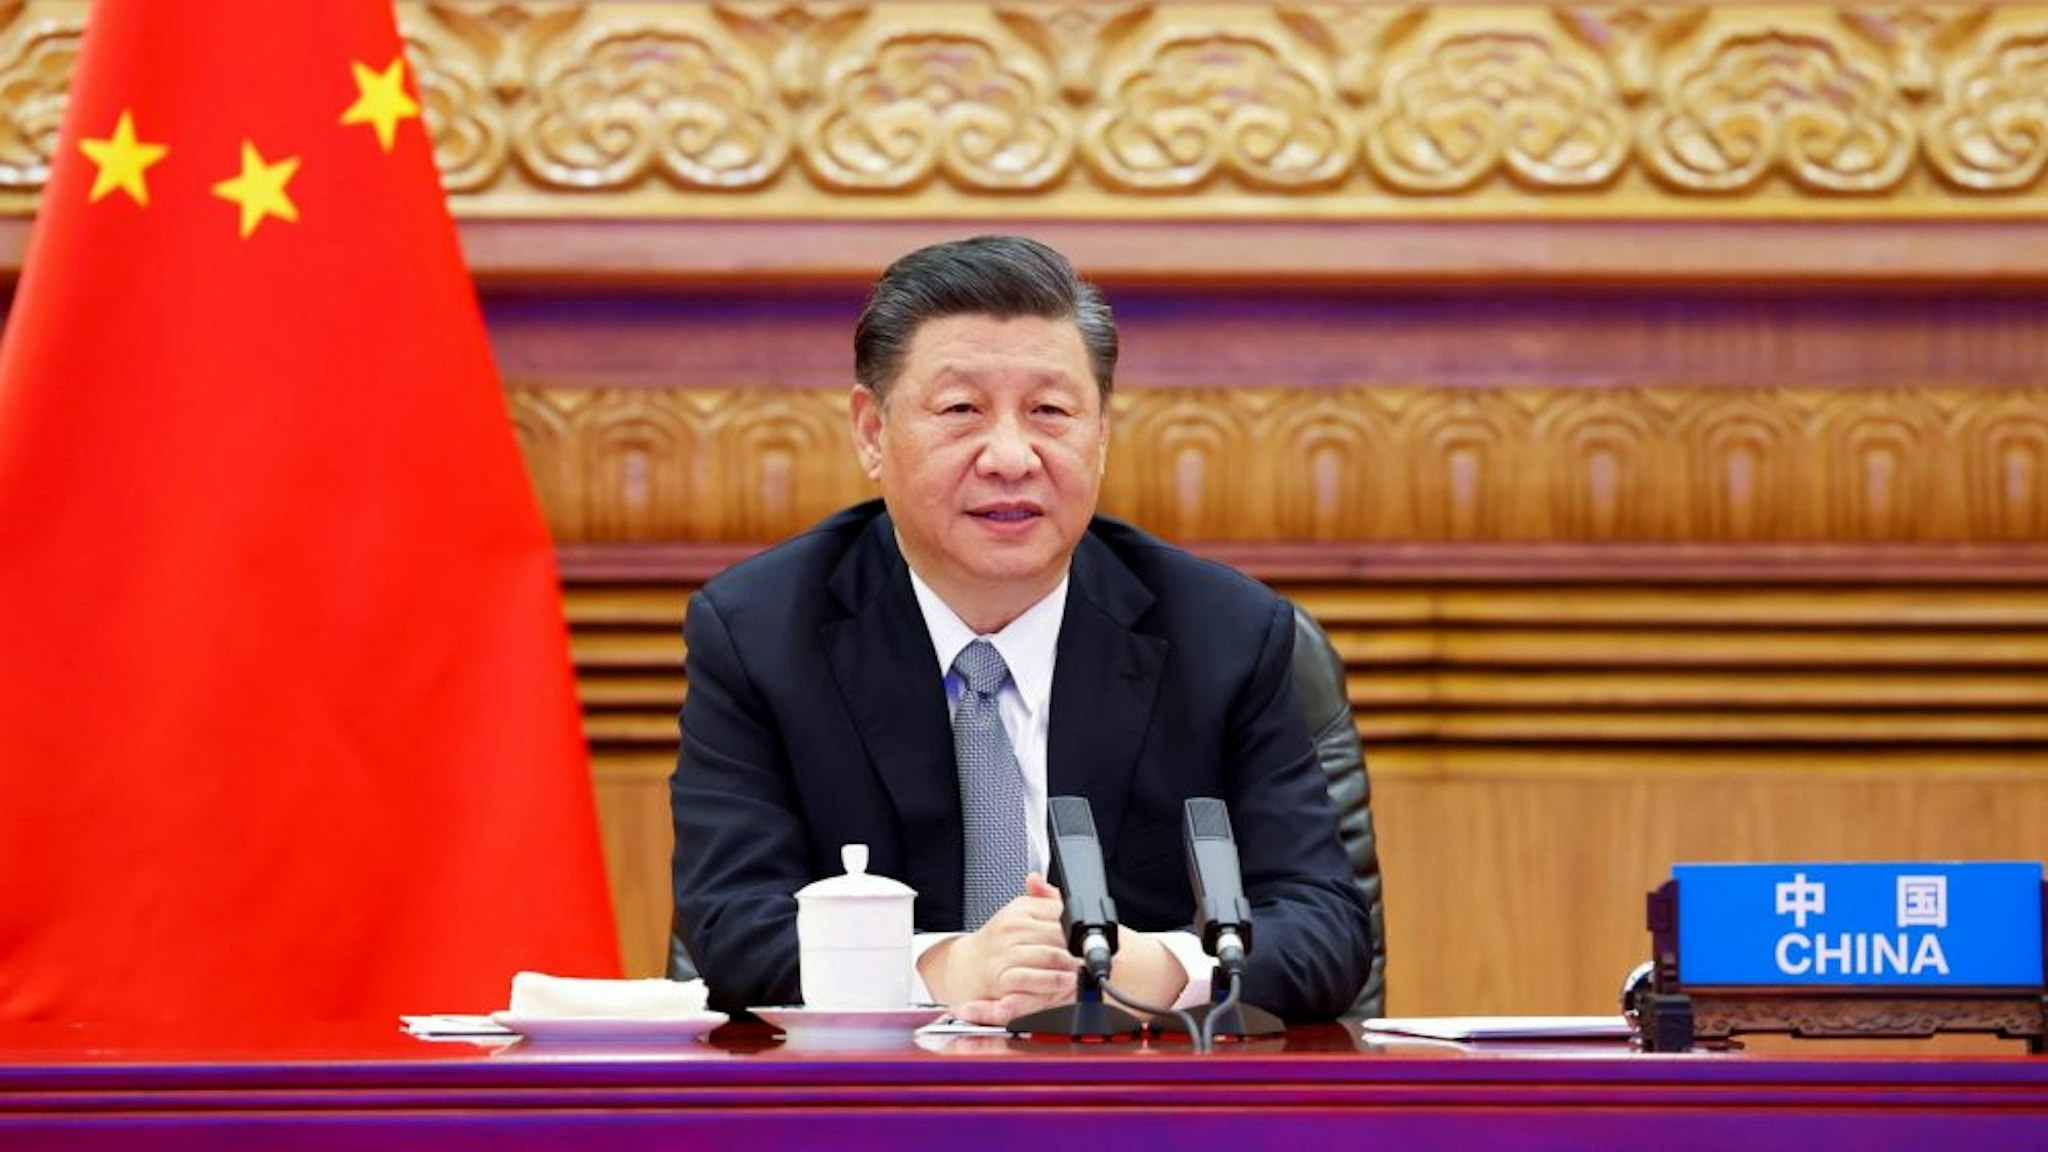 BEIJING, April 22, 2021: At the invitation of U.S. President Joe Biden, Chinese President Xi Jinping attends the Leaders Summit on Climate via video link and delivers an important speech titled "For Man and Nature: Building a Community of Life Together" in Beijing, capital of China, April 22, 2021.